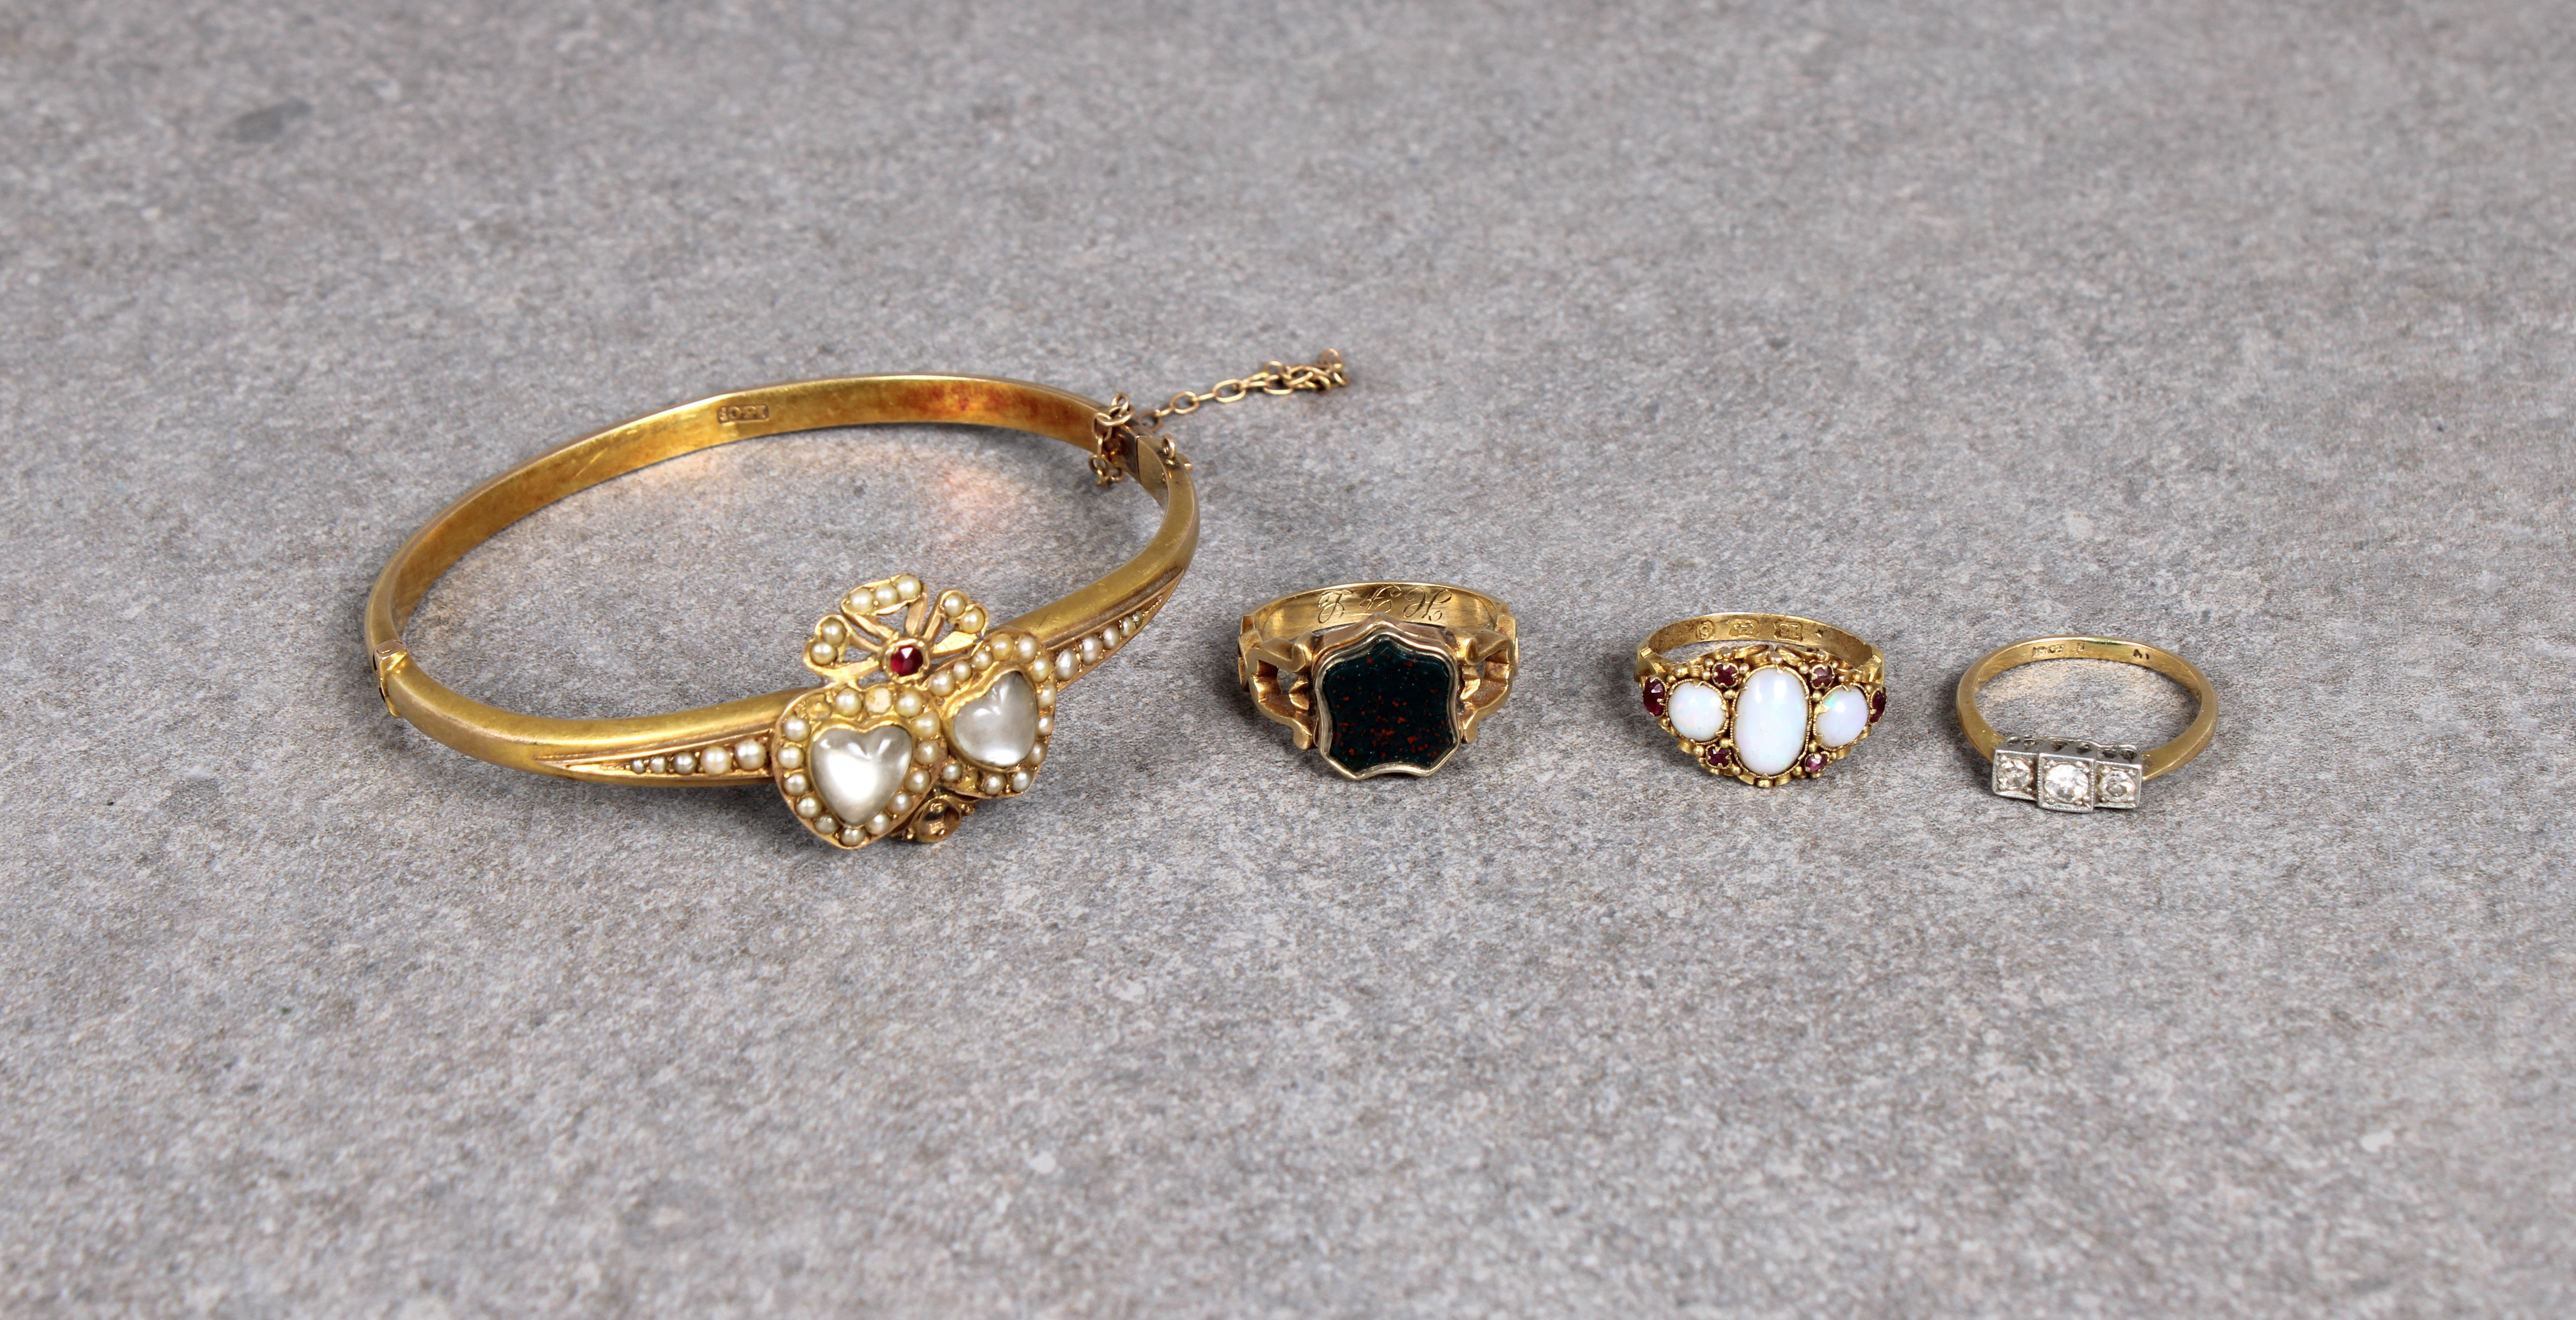 A small collection of yellow metal & gold jewellery